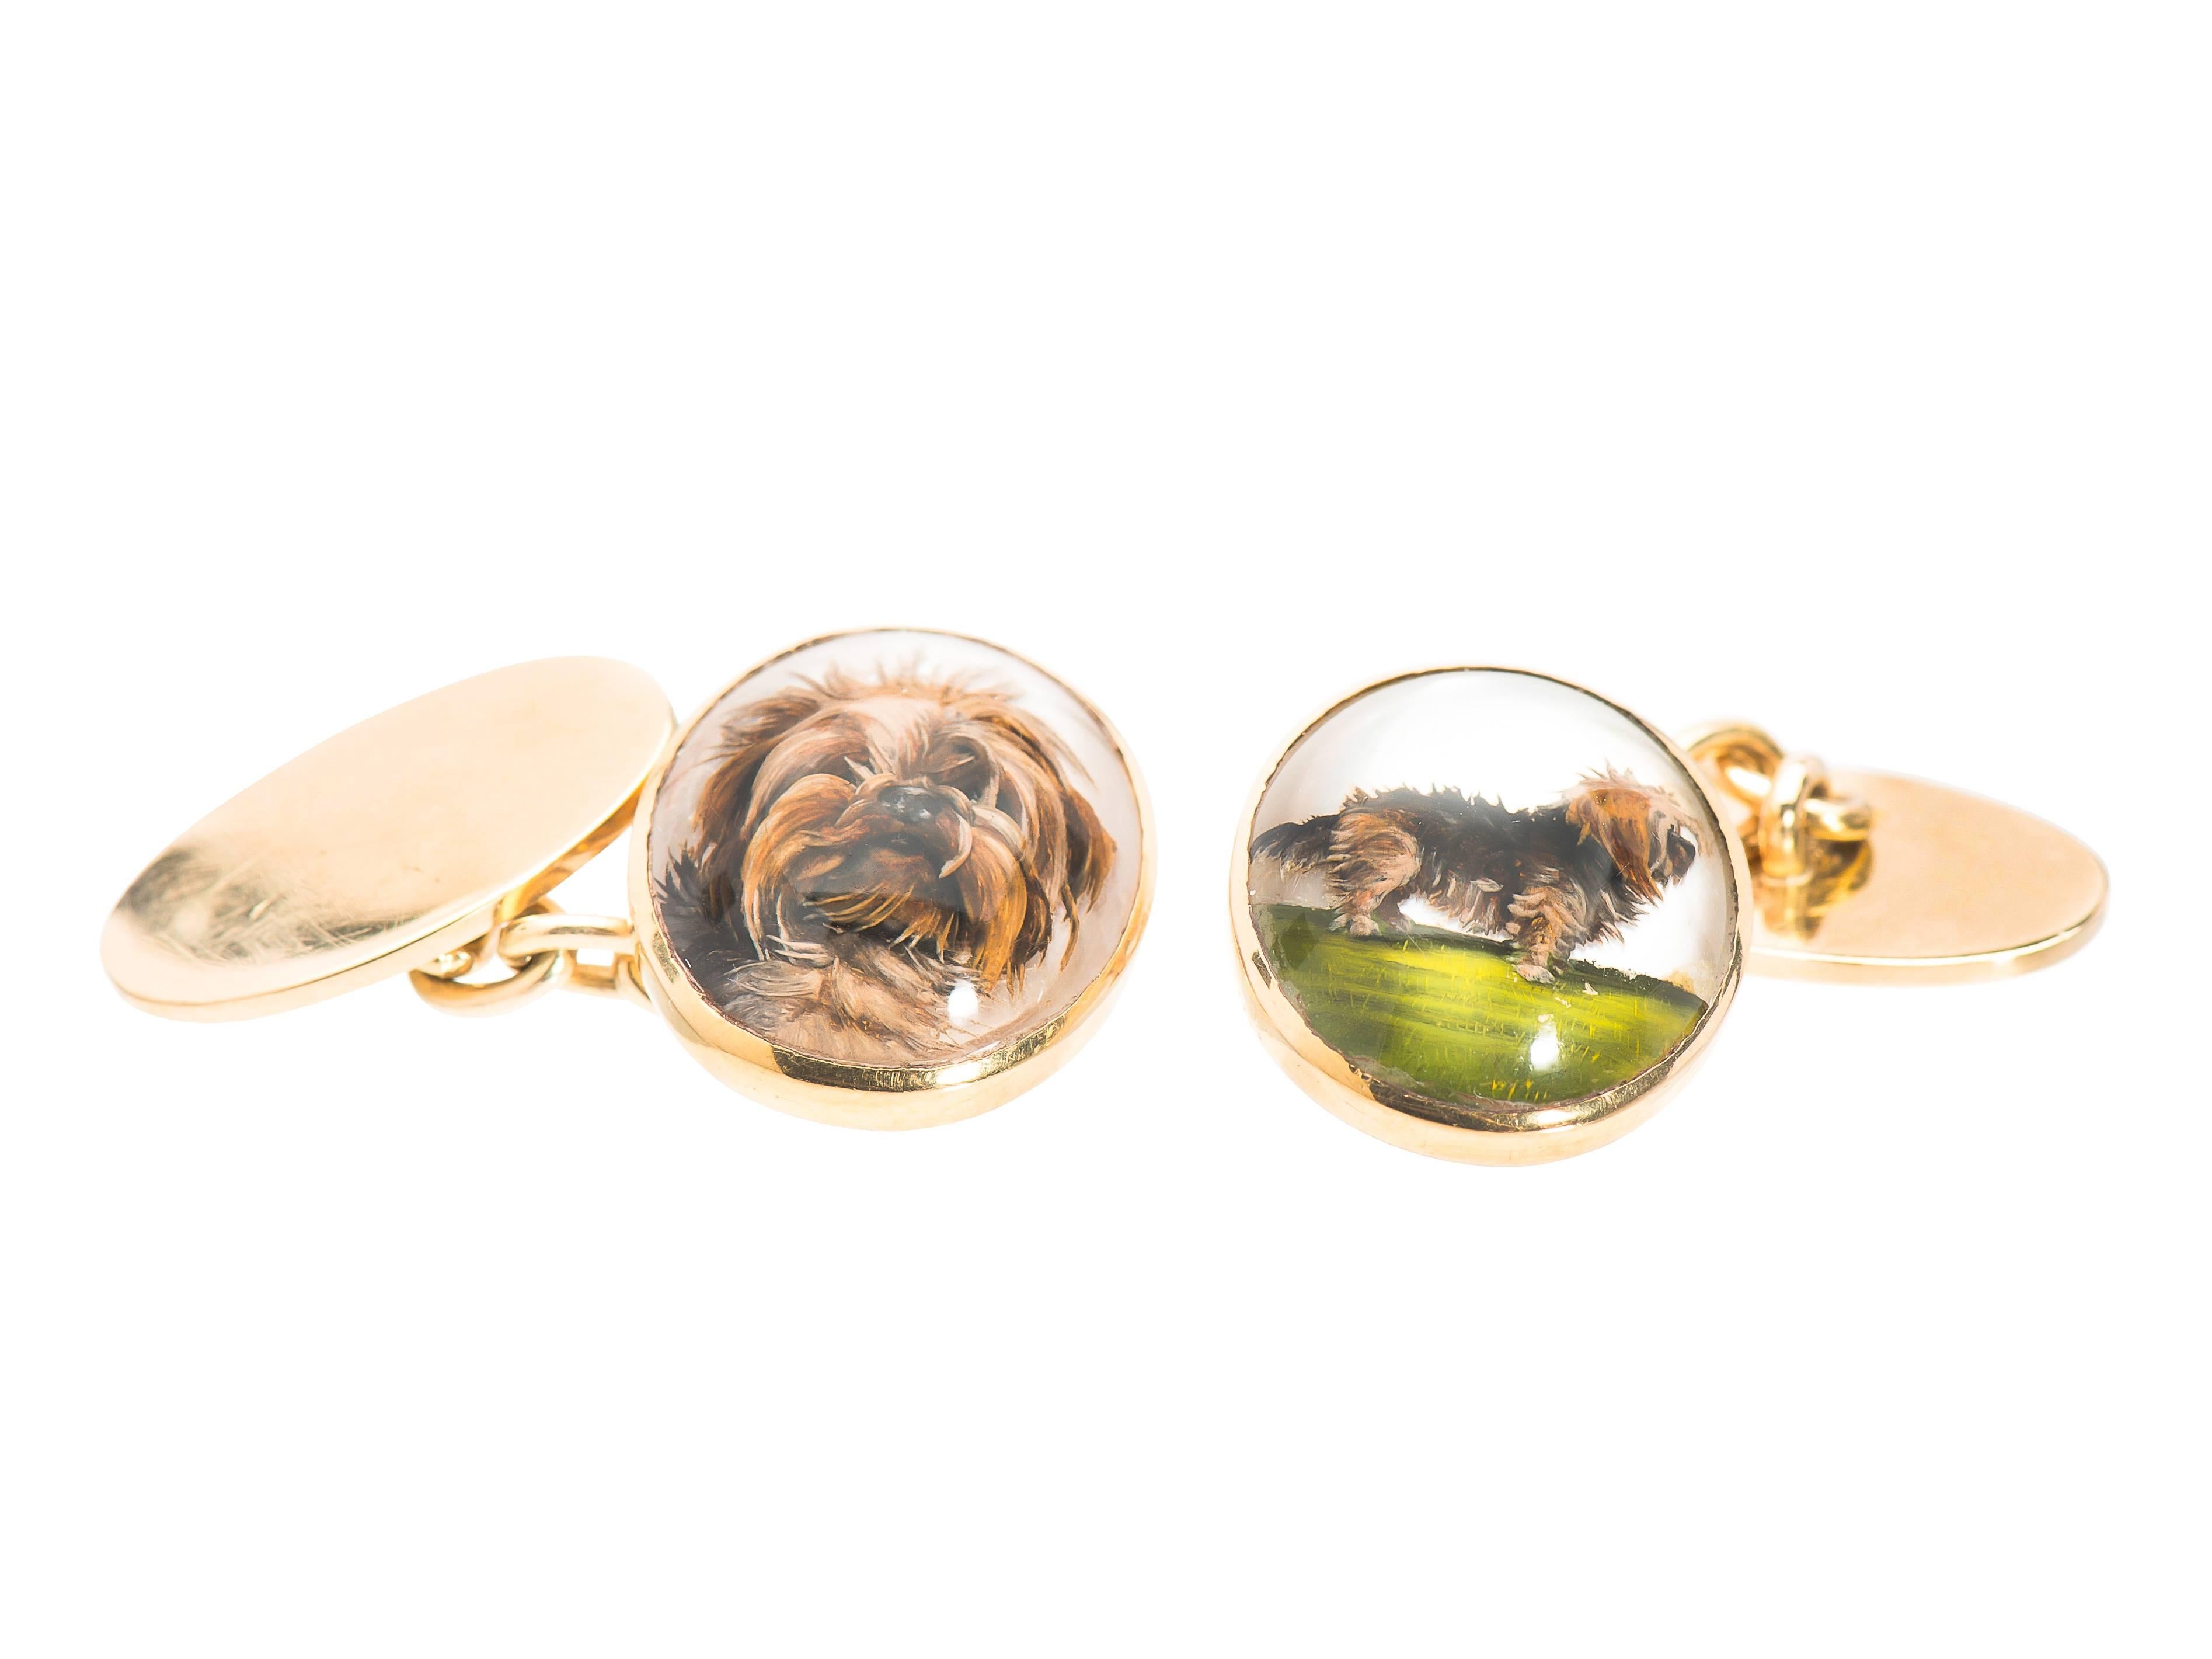 Known as reverse crystal intaglios or Essex crystals, this pair, carved backwards into the back of a crystal, painted in reverse and set in 18kt gold are artist miniature depictions so realistic that you want a terrier kiss. There are two images,